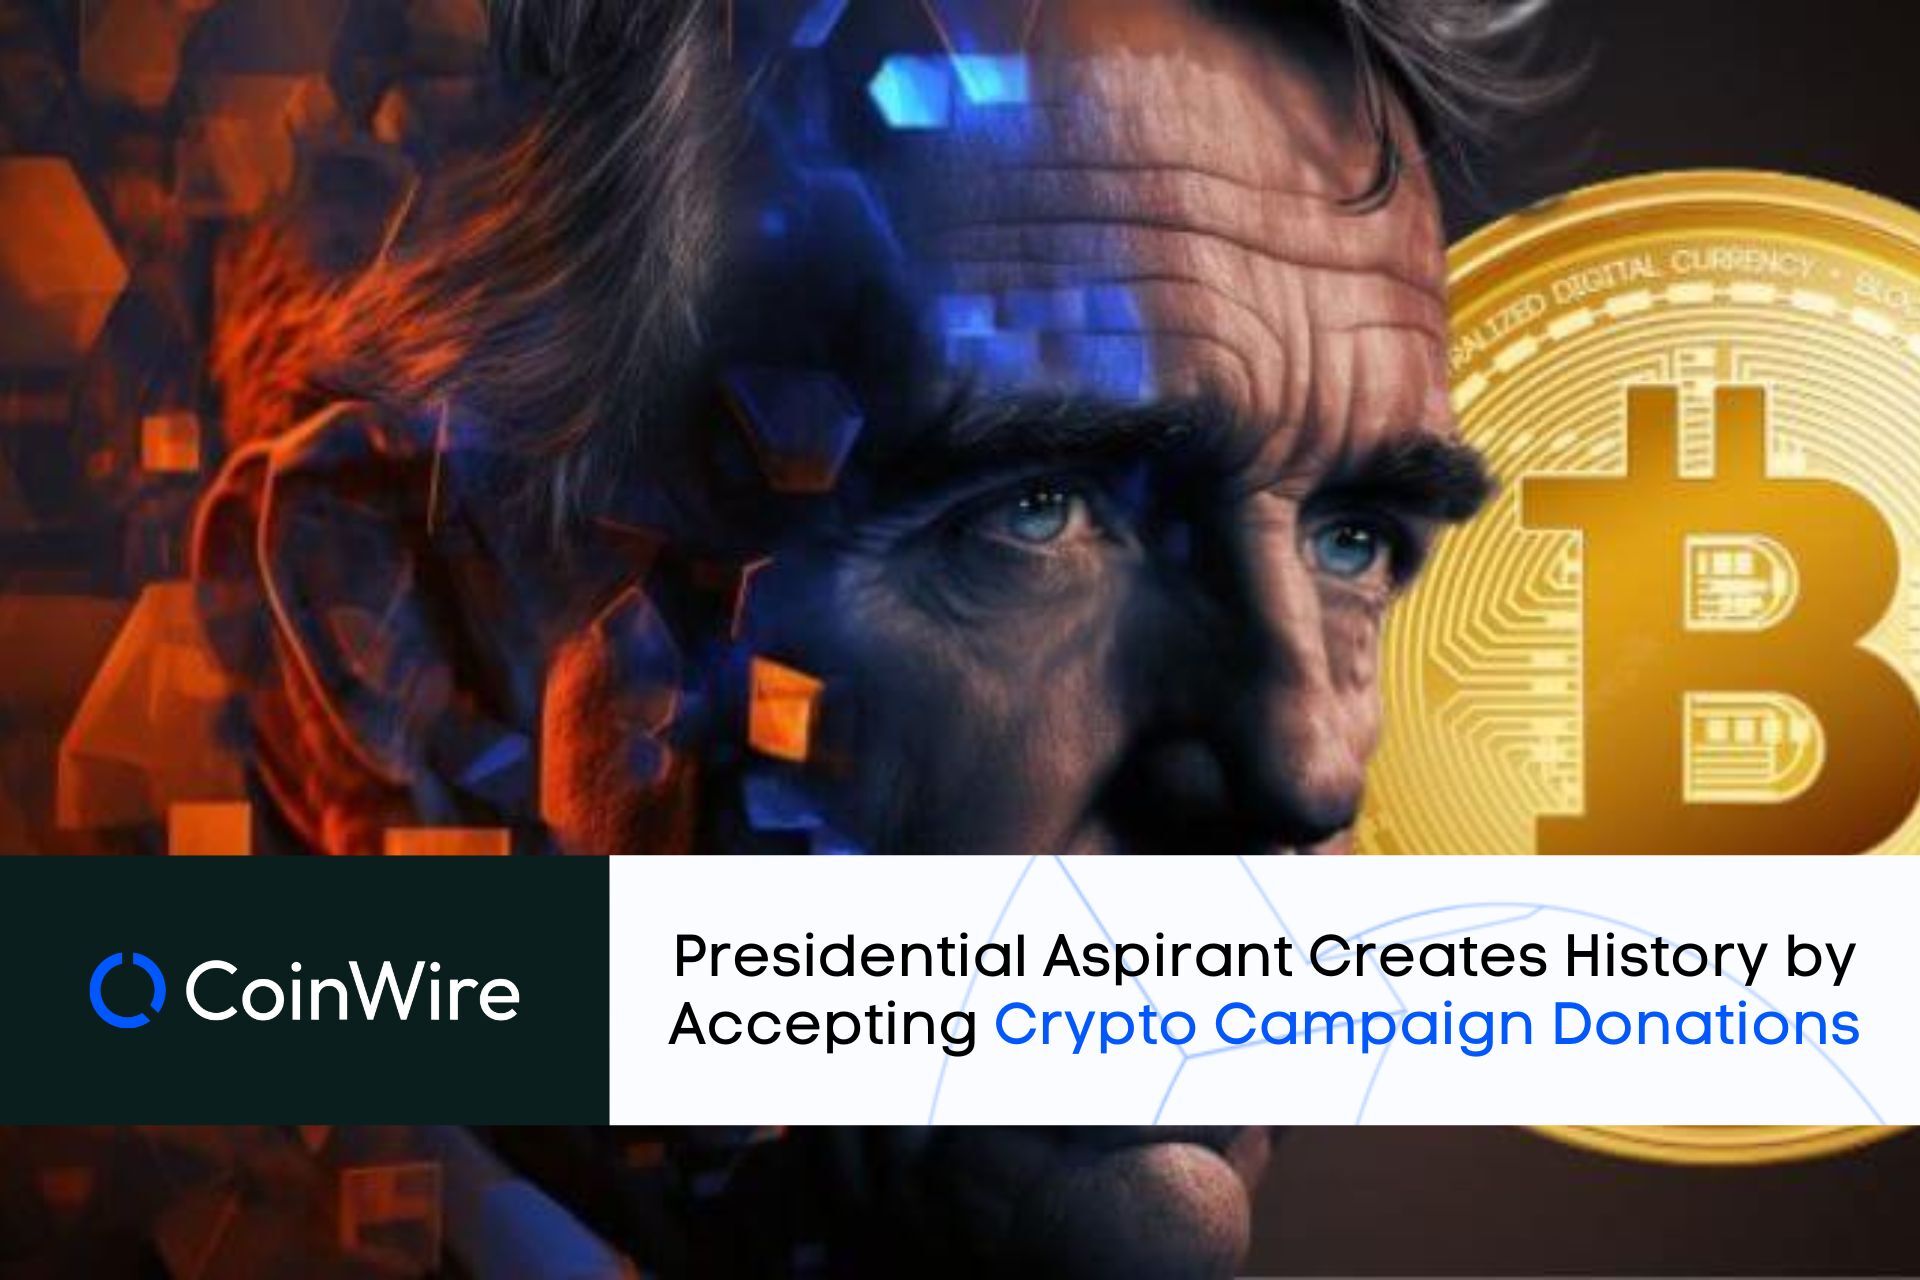 Robert F. Kennedy Jr. Creates History By Accepting Crypto Campaign Donations